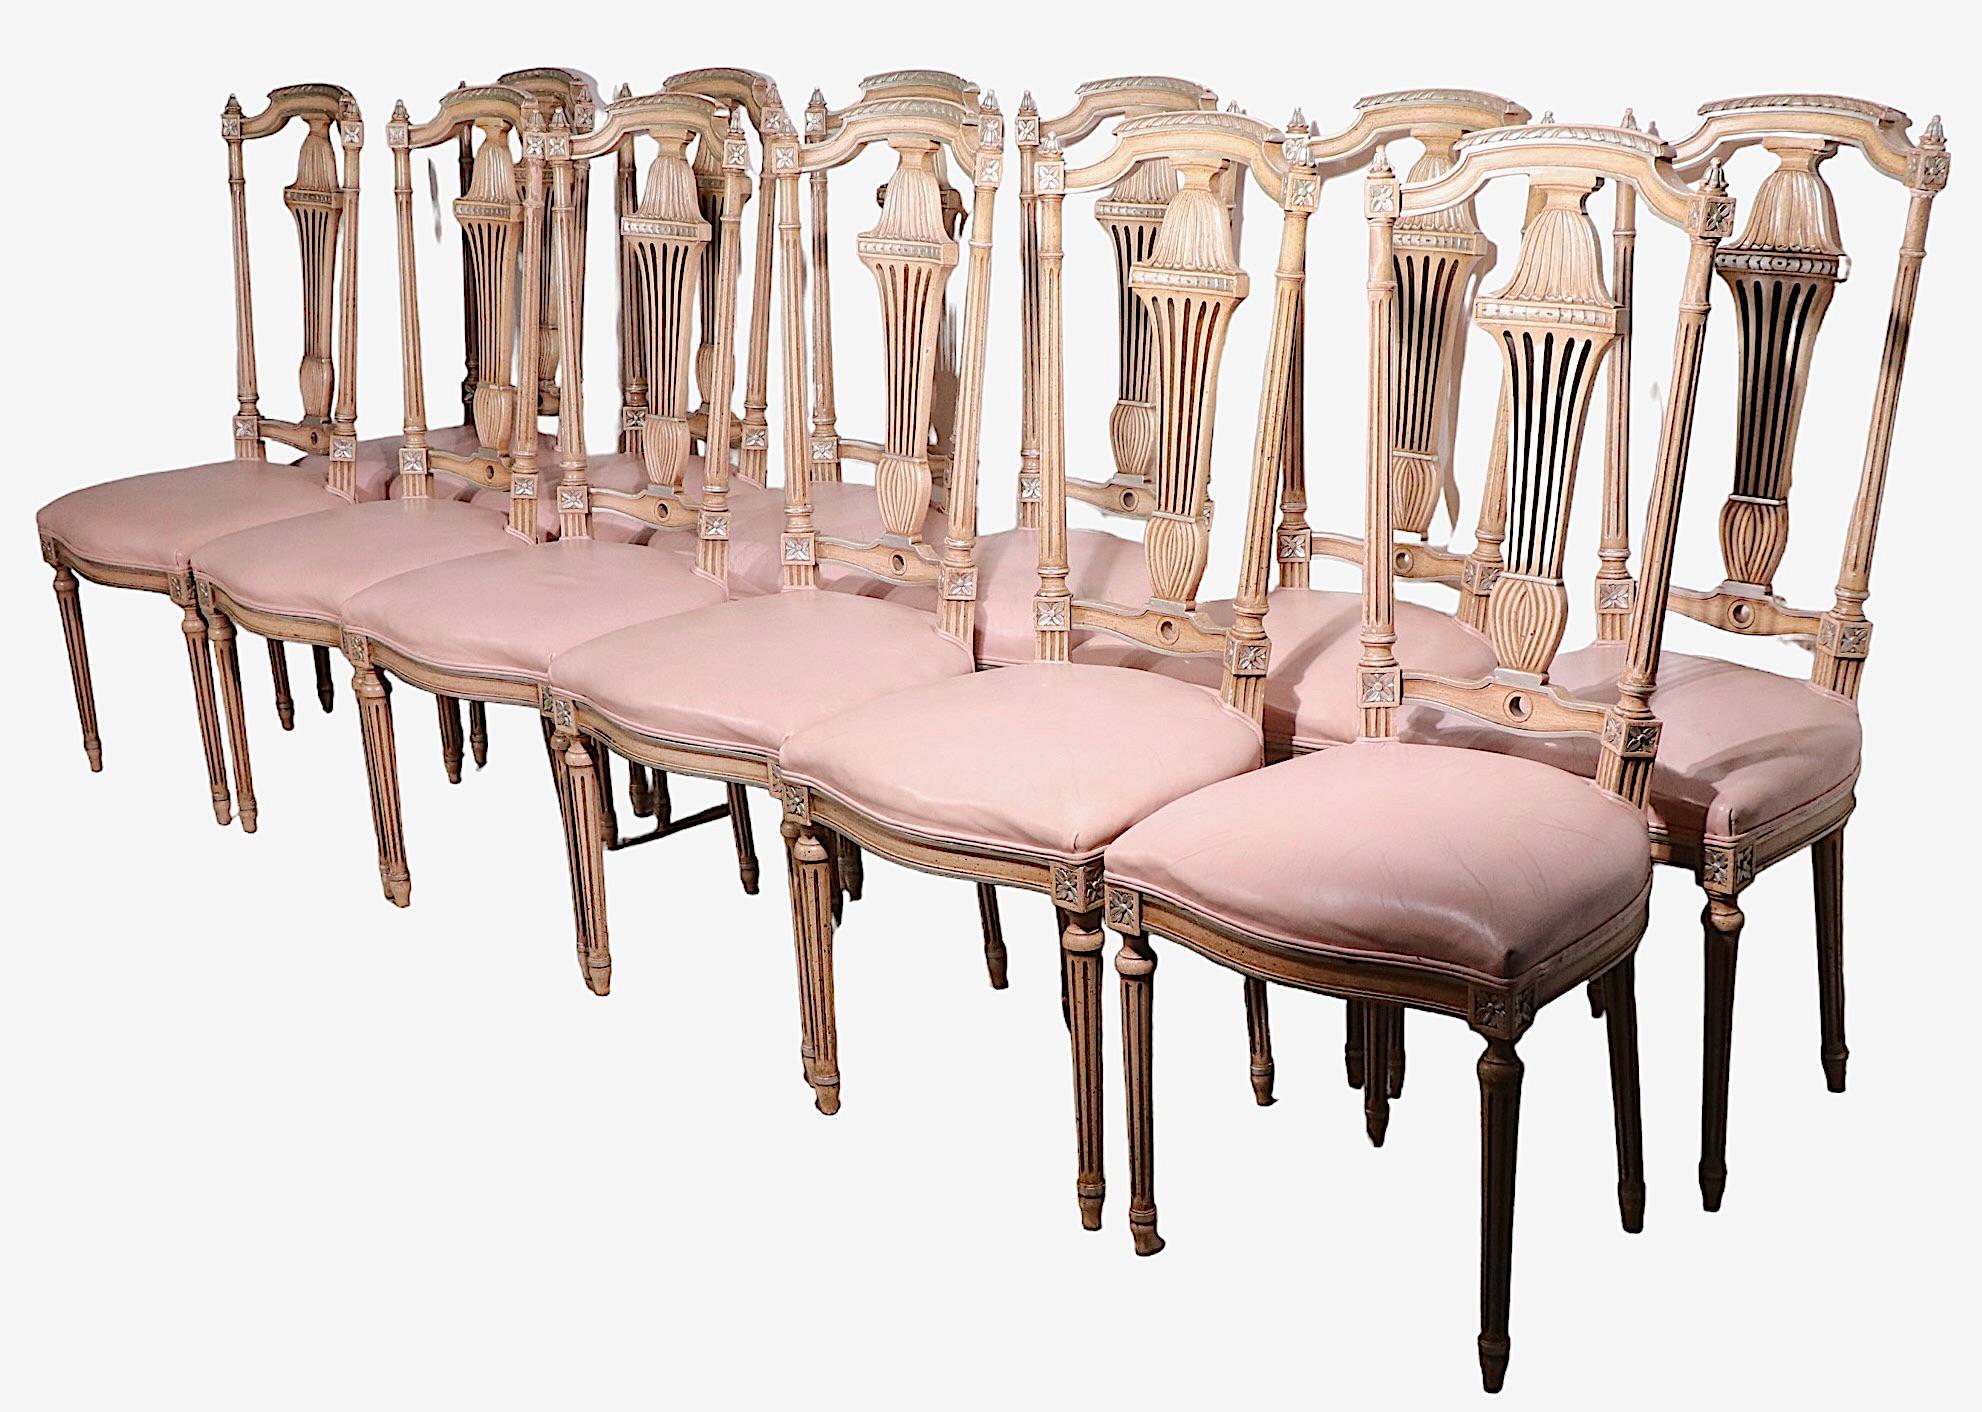 Decorative Set of 12 Italian Style Dining Chairs of Carved Wood and Leather For Sale 2